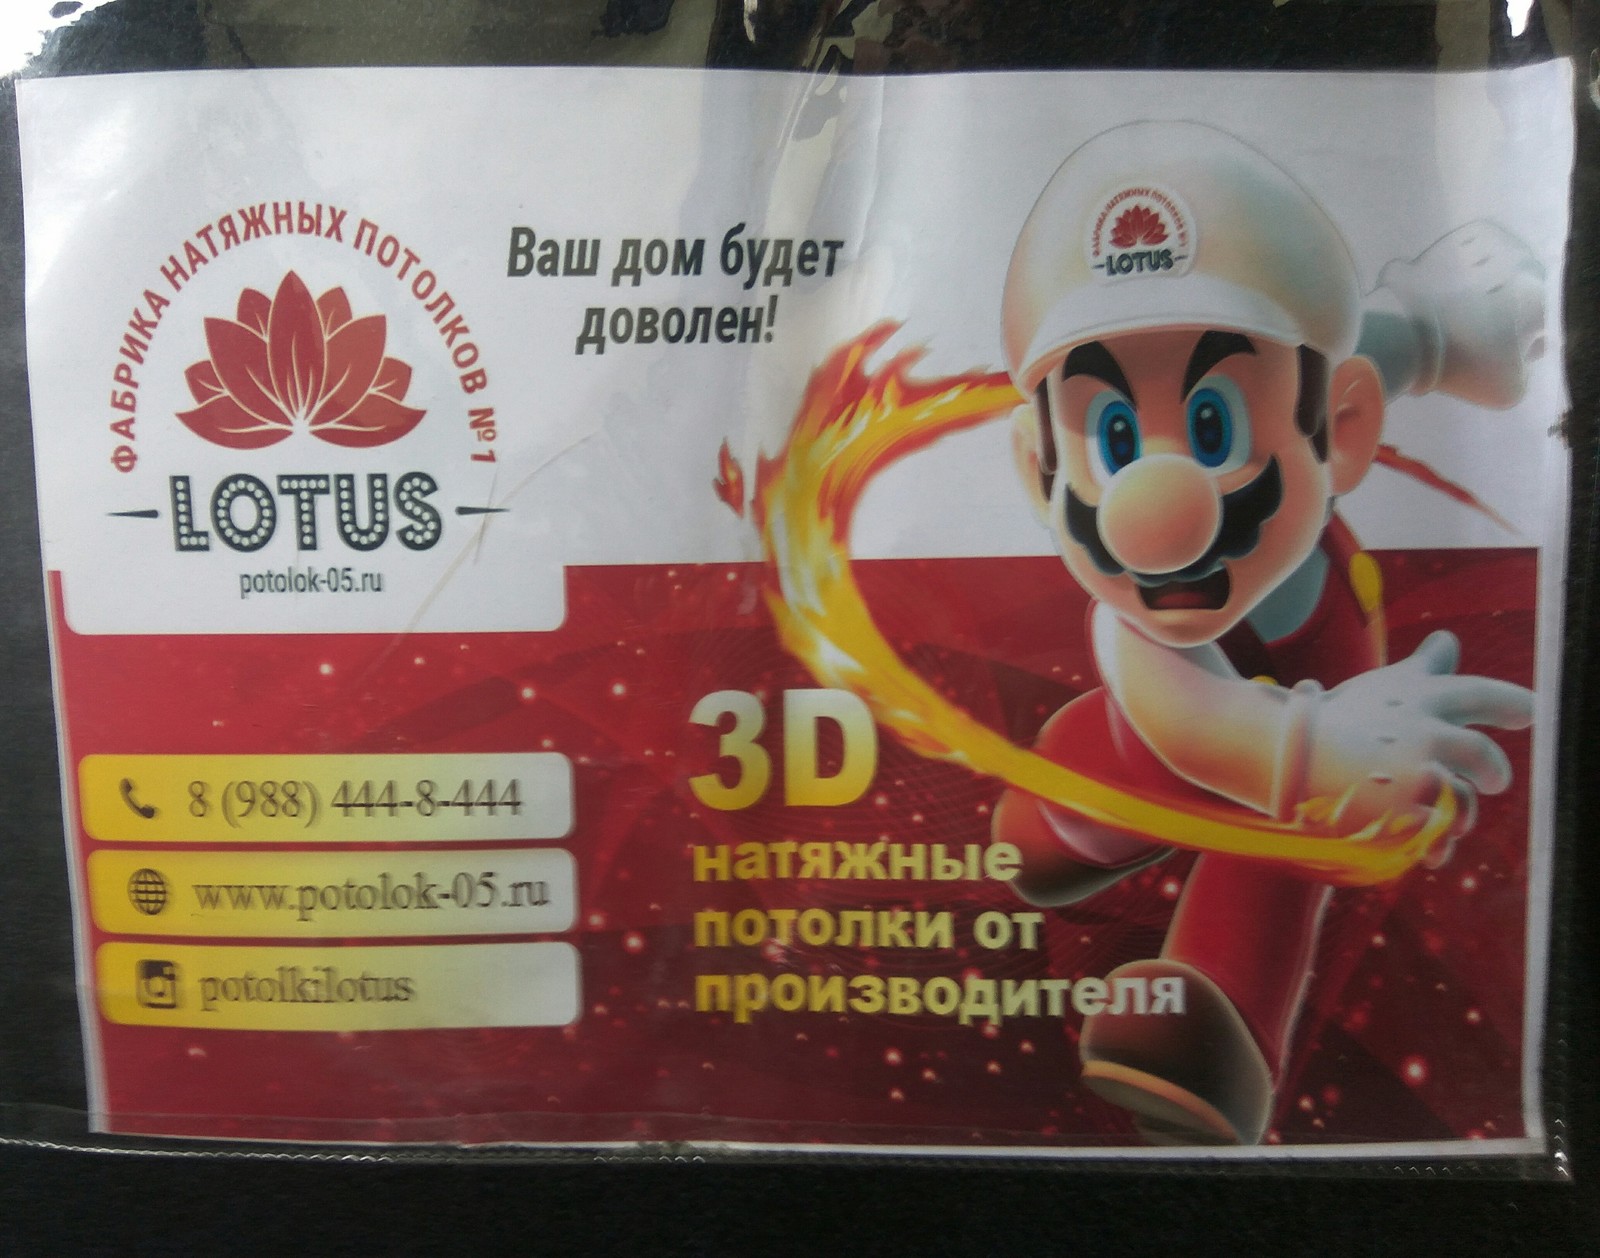 Changed profession - Mario, Plumber, Stretch ceiling, Advertising, Benefit